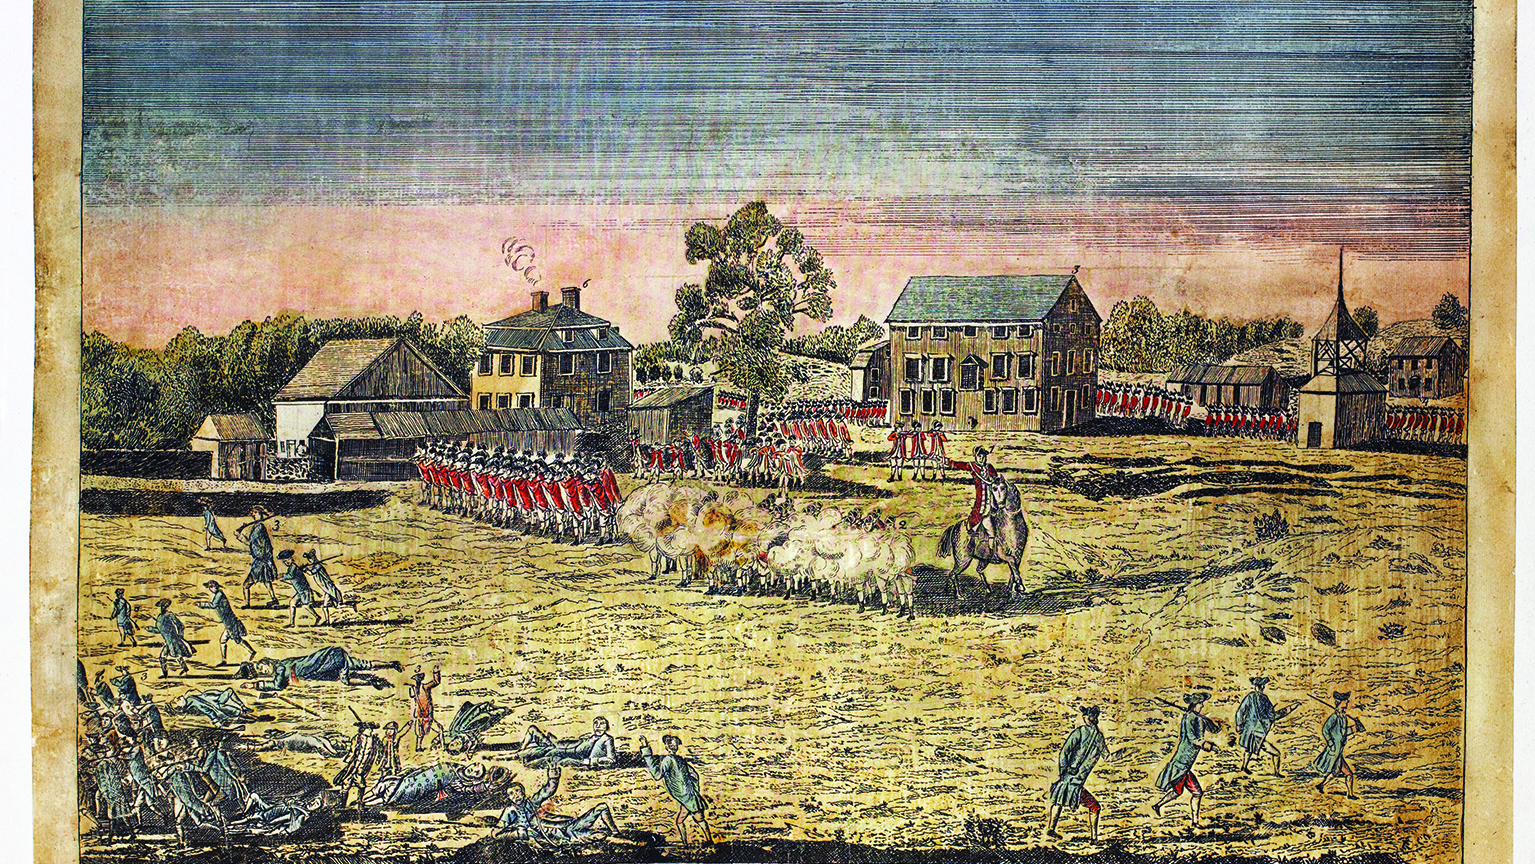 A hand-colored etching of the Battle of Lexington by Amos Doolittle was advertised for sale in the December 1775 Connecticut Journal. (Universal History Archive/Getty Images)